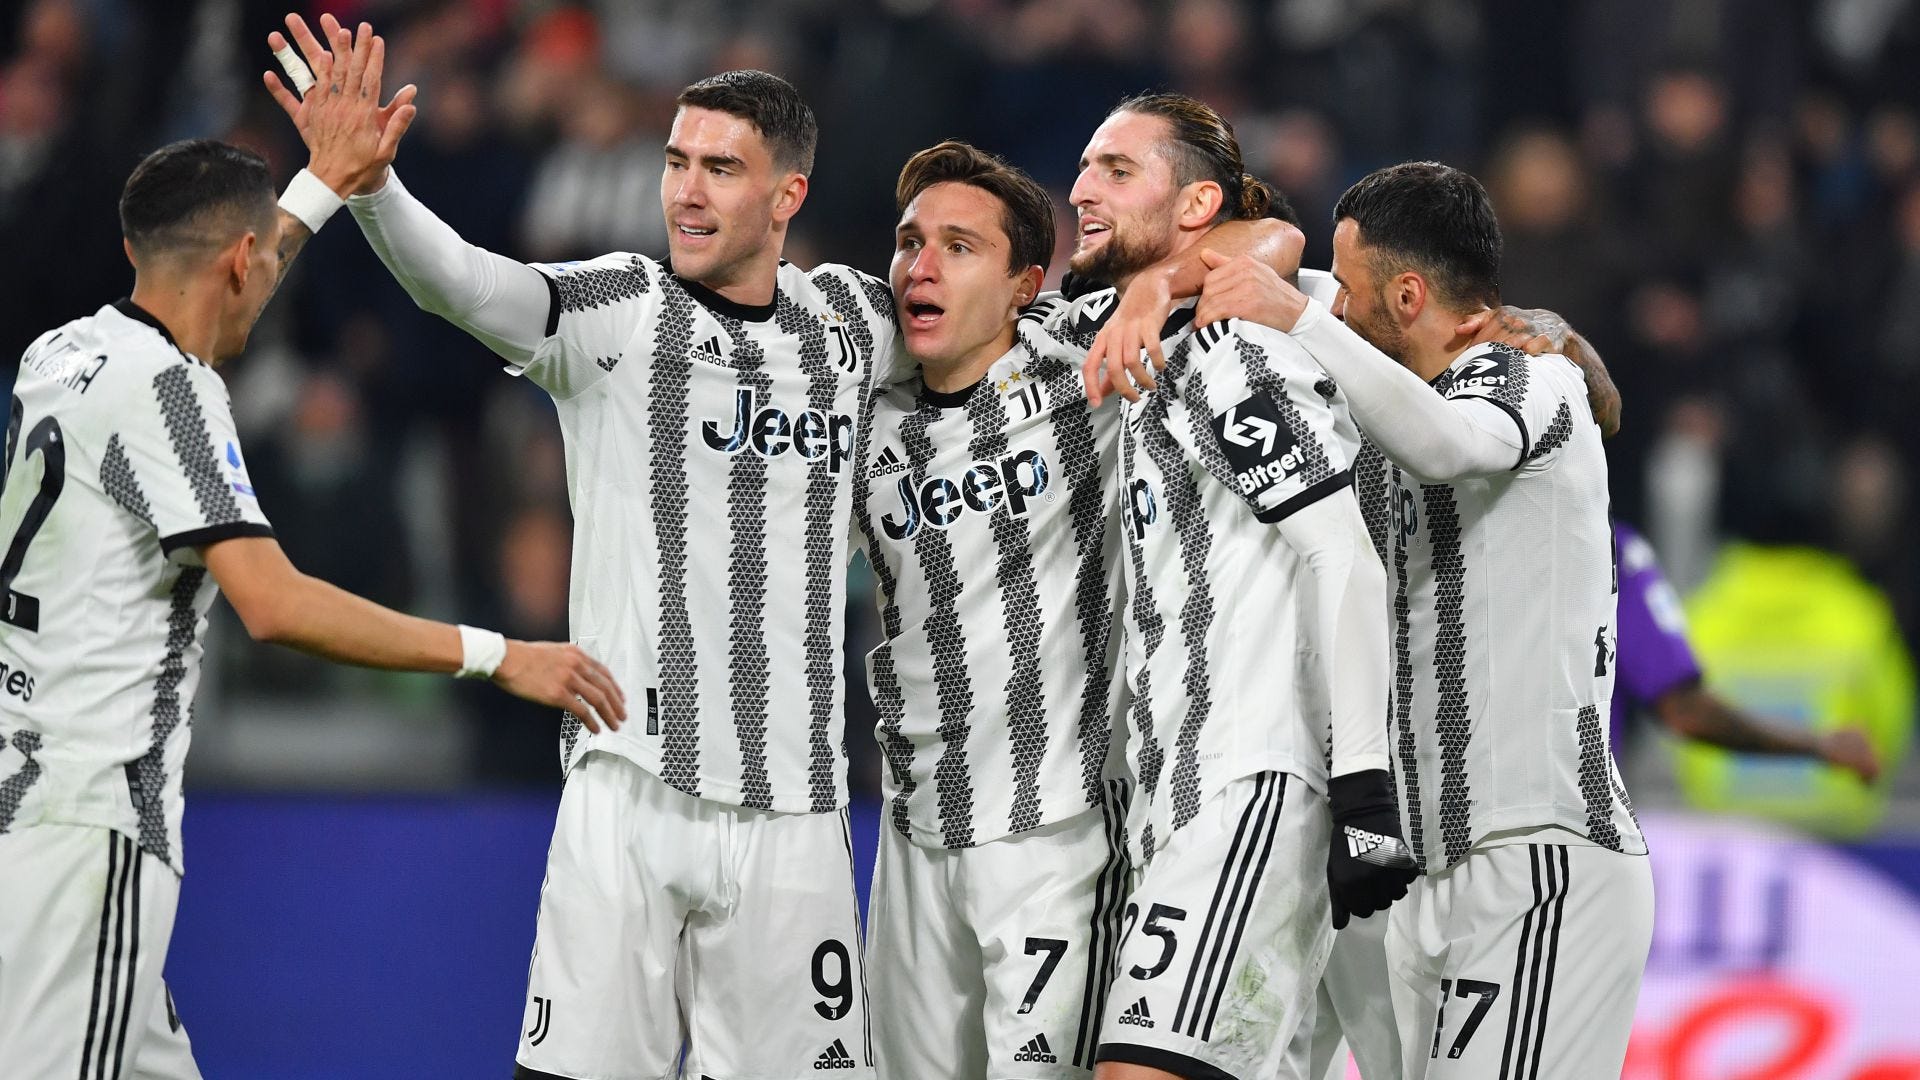 Spezia vs Juventus Live stream, TV channel, kick-off time and where to watch Goal